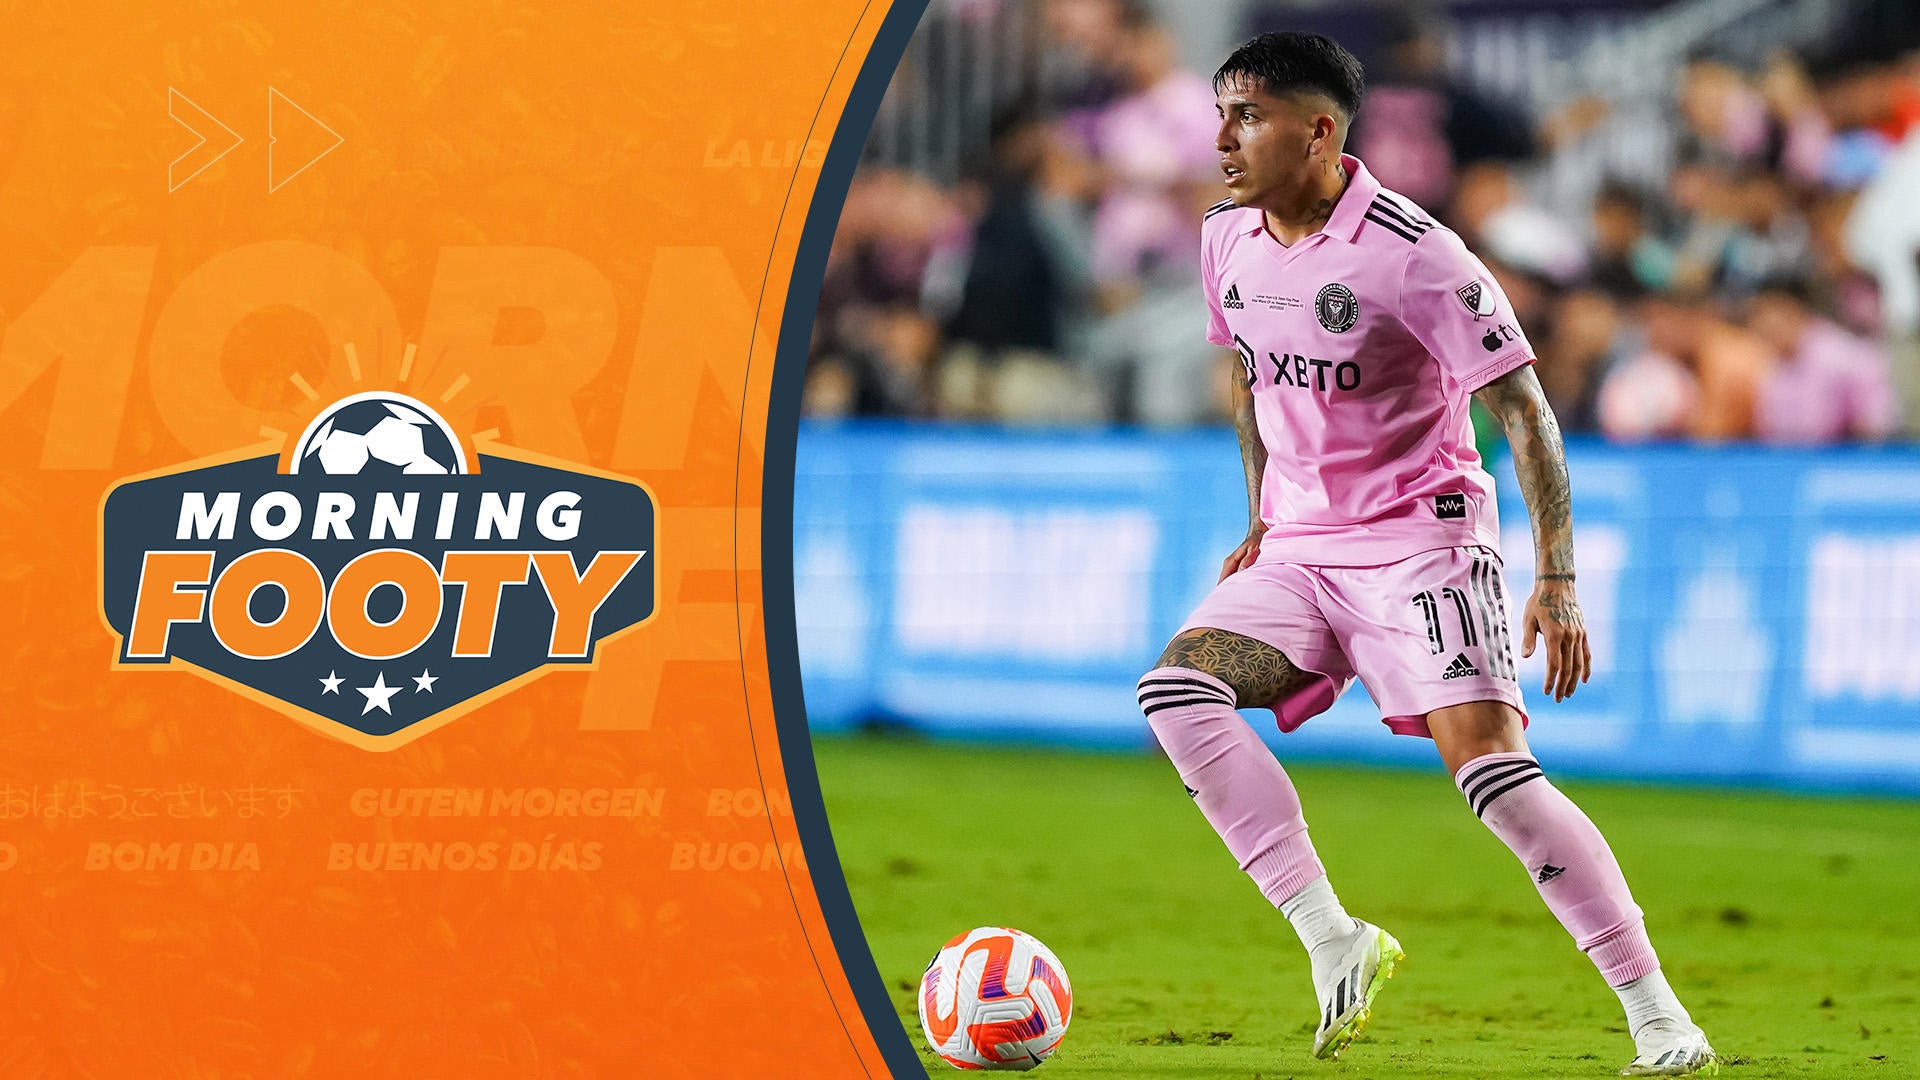 Can Inter Miami Bounce Back After Open Cup Loss? Morning Footy Part 1 Live Stream of Soccer